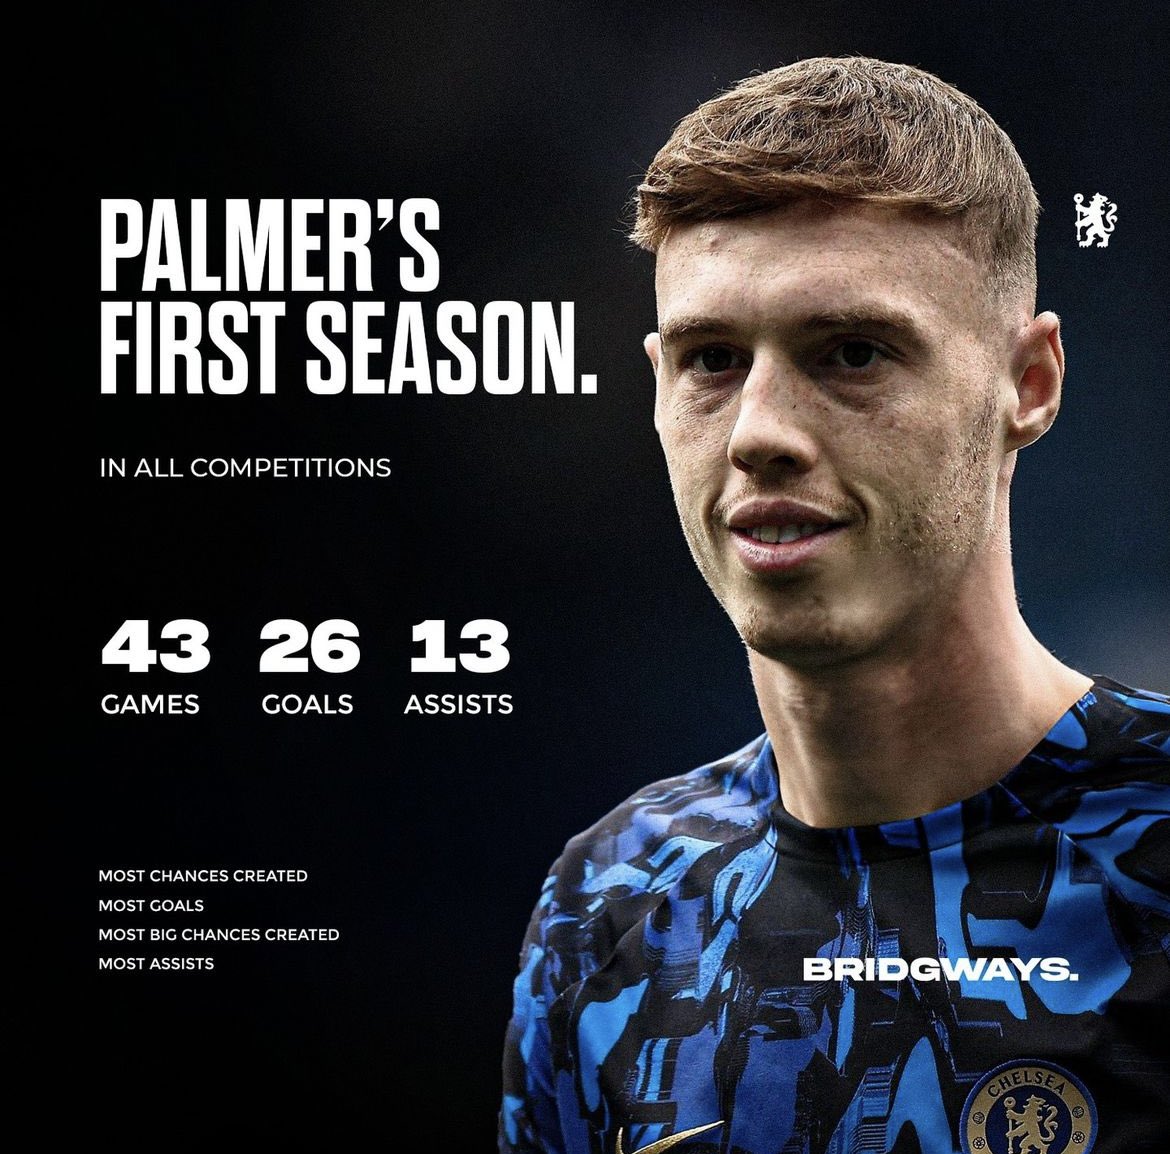 For me Cole Palmer has to be the favourite to win the young player of the year.